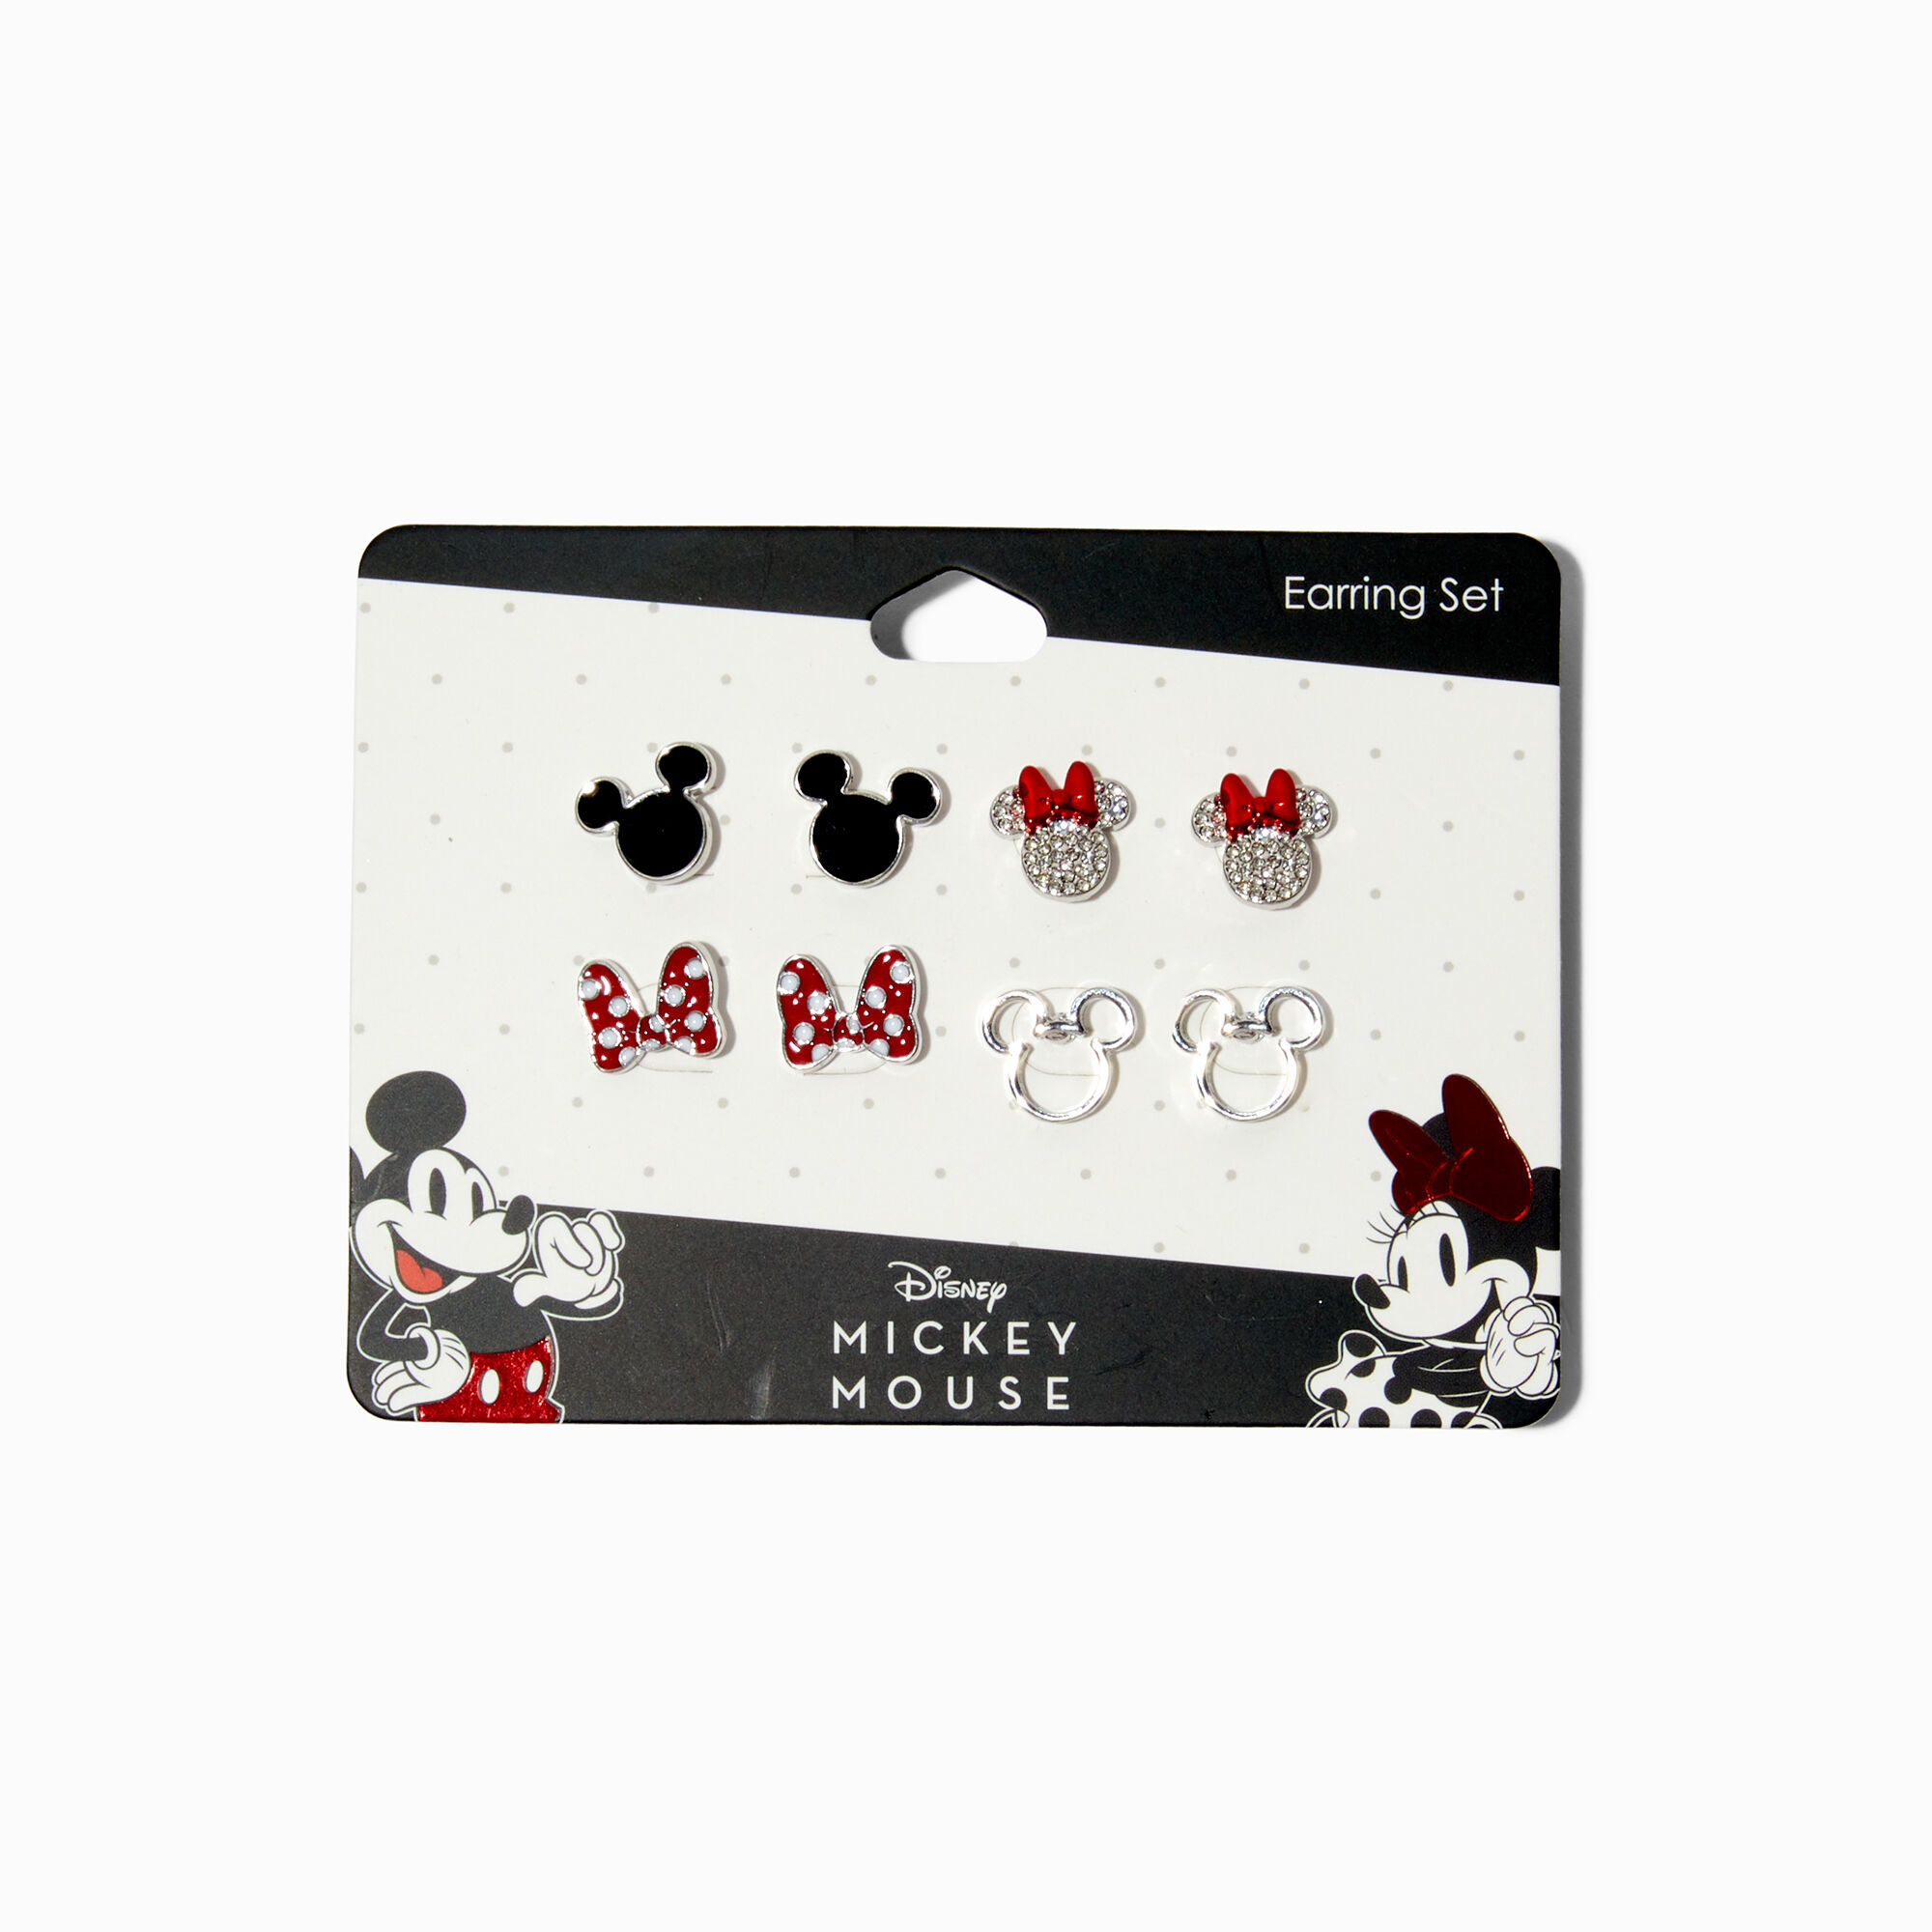 View Claires Disney 100 Mickey Mouse Earring Set 4 Pack information